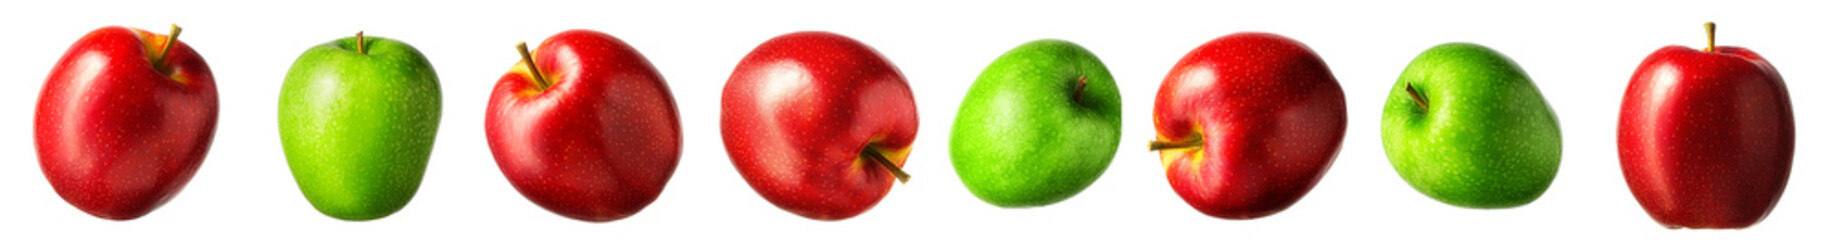 Poster - Group of red and green apples on white background